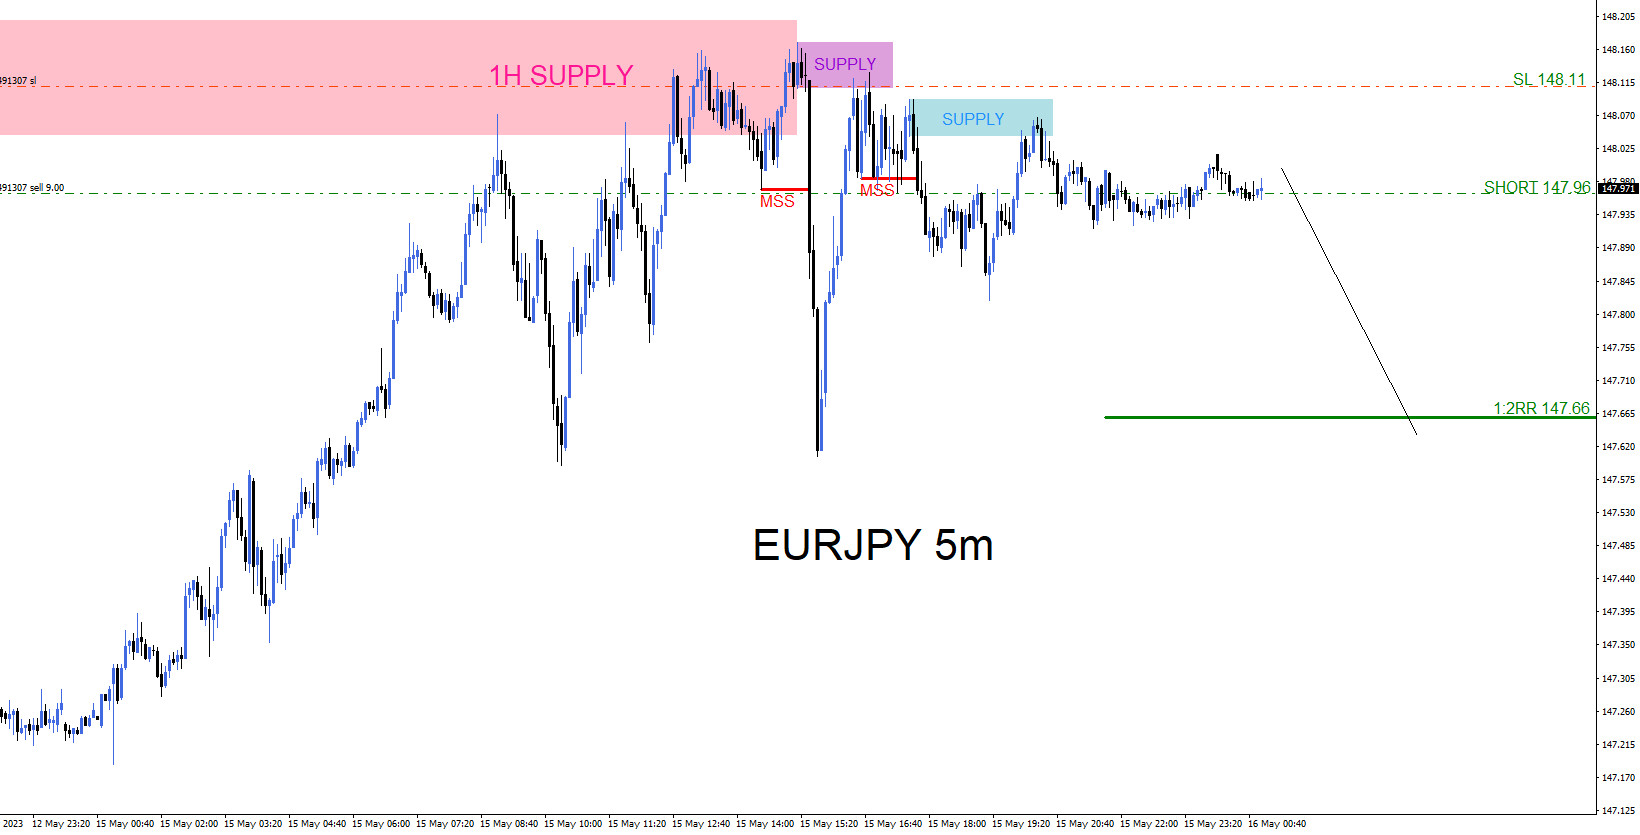 EURJPY : Sell Trade Hits Target